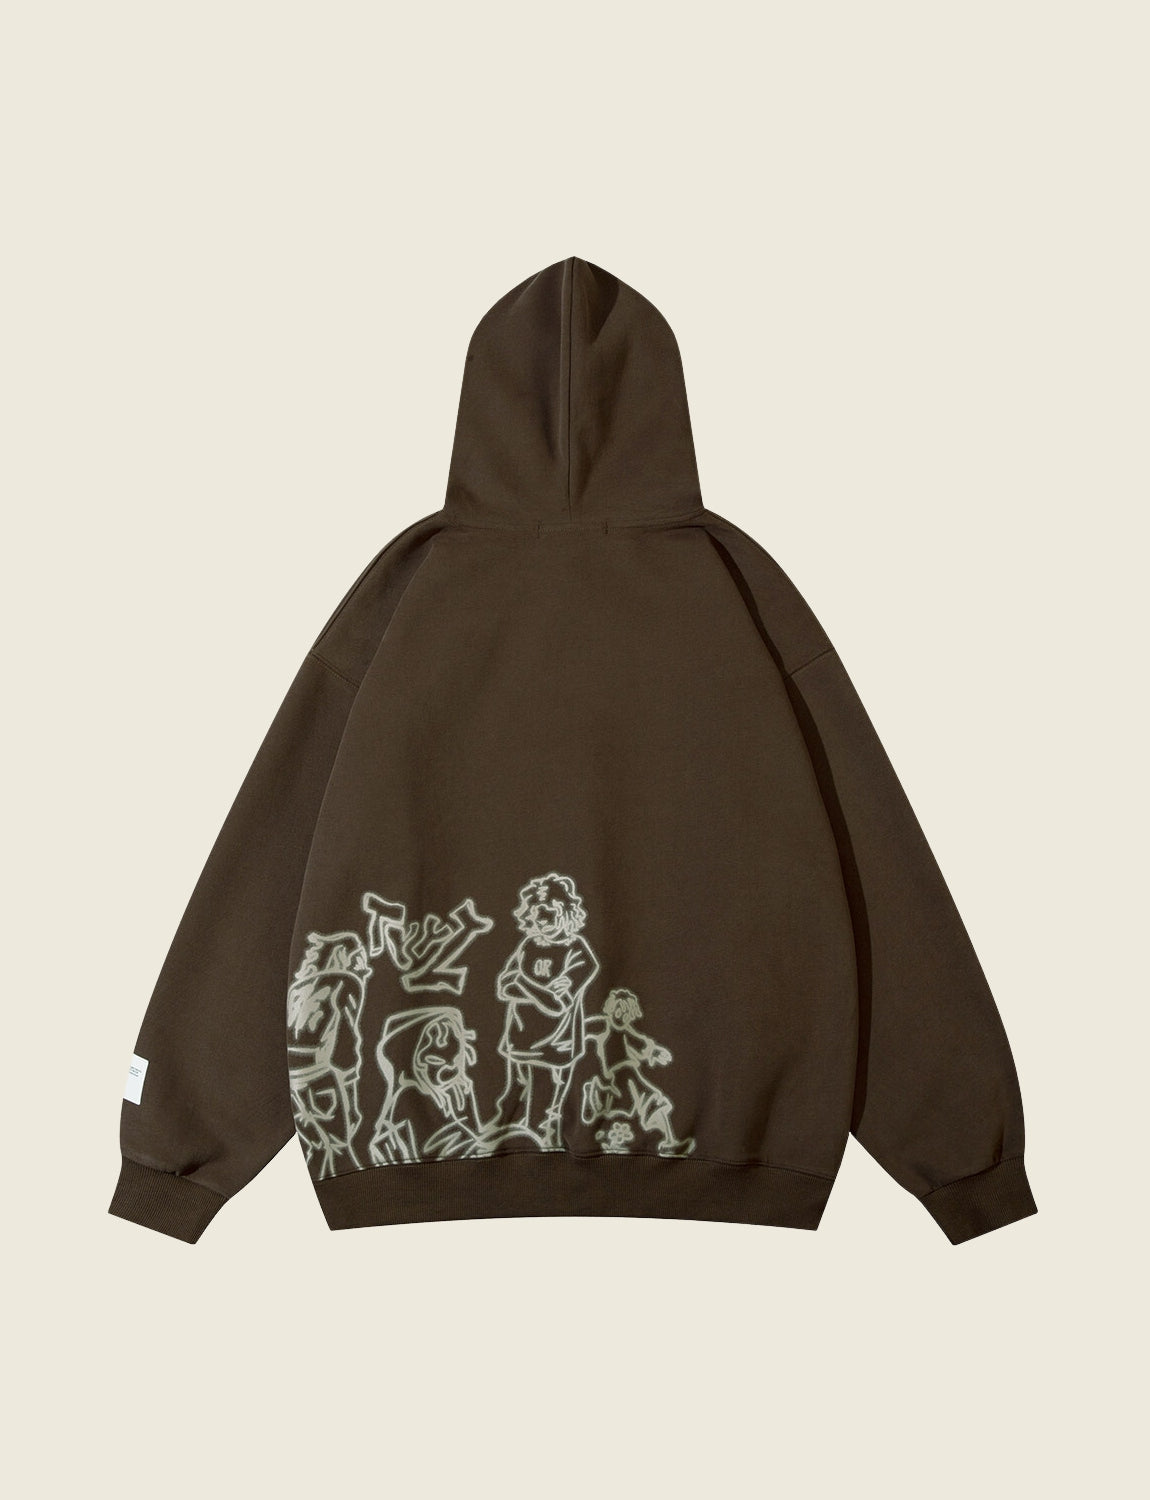 FSW® "Afterparty" Hoodie